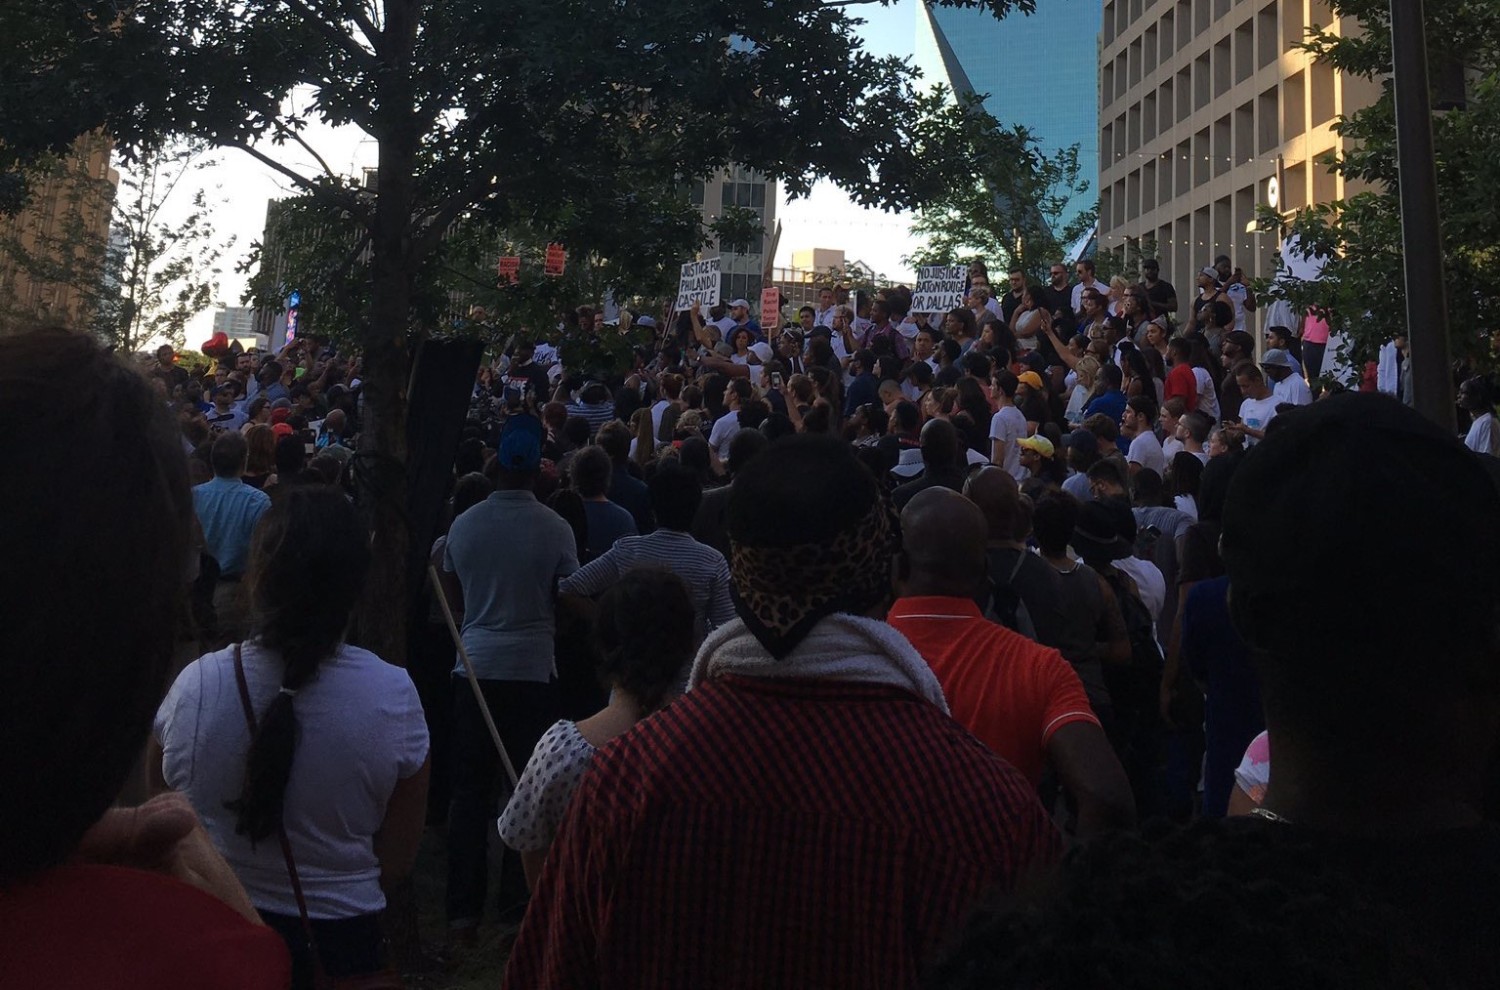 Protesters gathered peacefully on July 7 to recognize cases of police brutality and injustice in the immediate aftermath of the shootings in Baton Rouge, LA and Falcon Heights, Minn. Photo by Angelicque Roa.